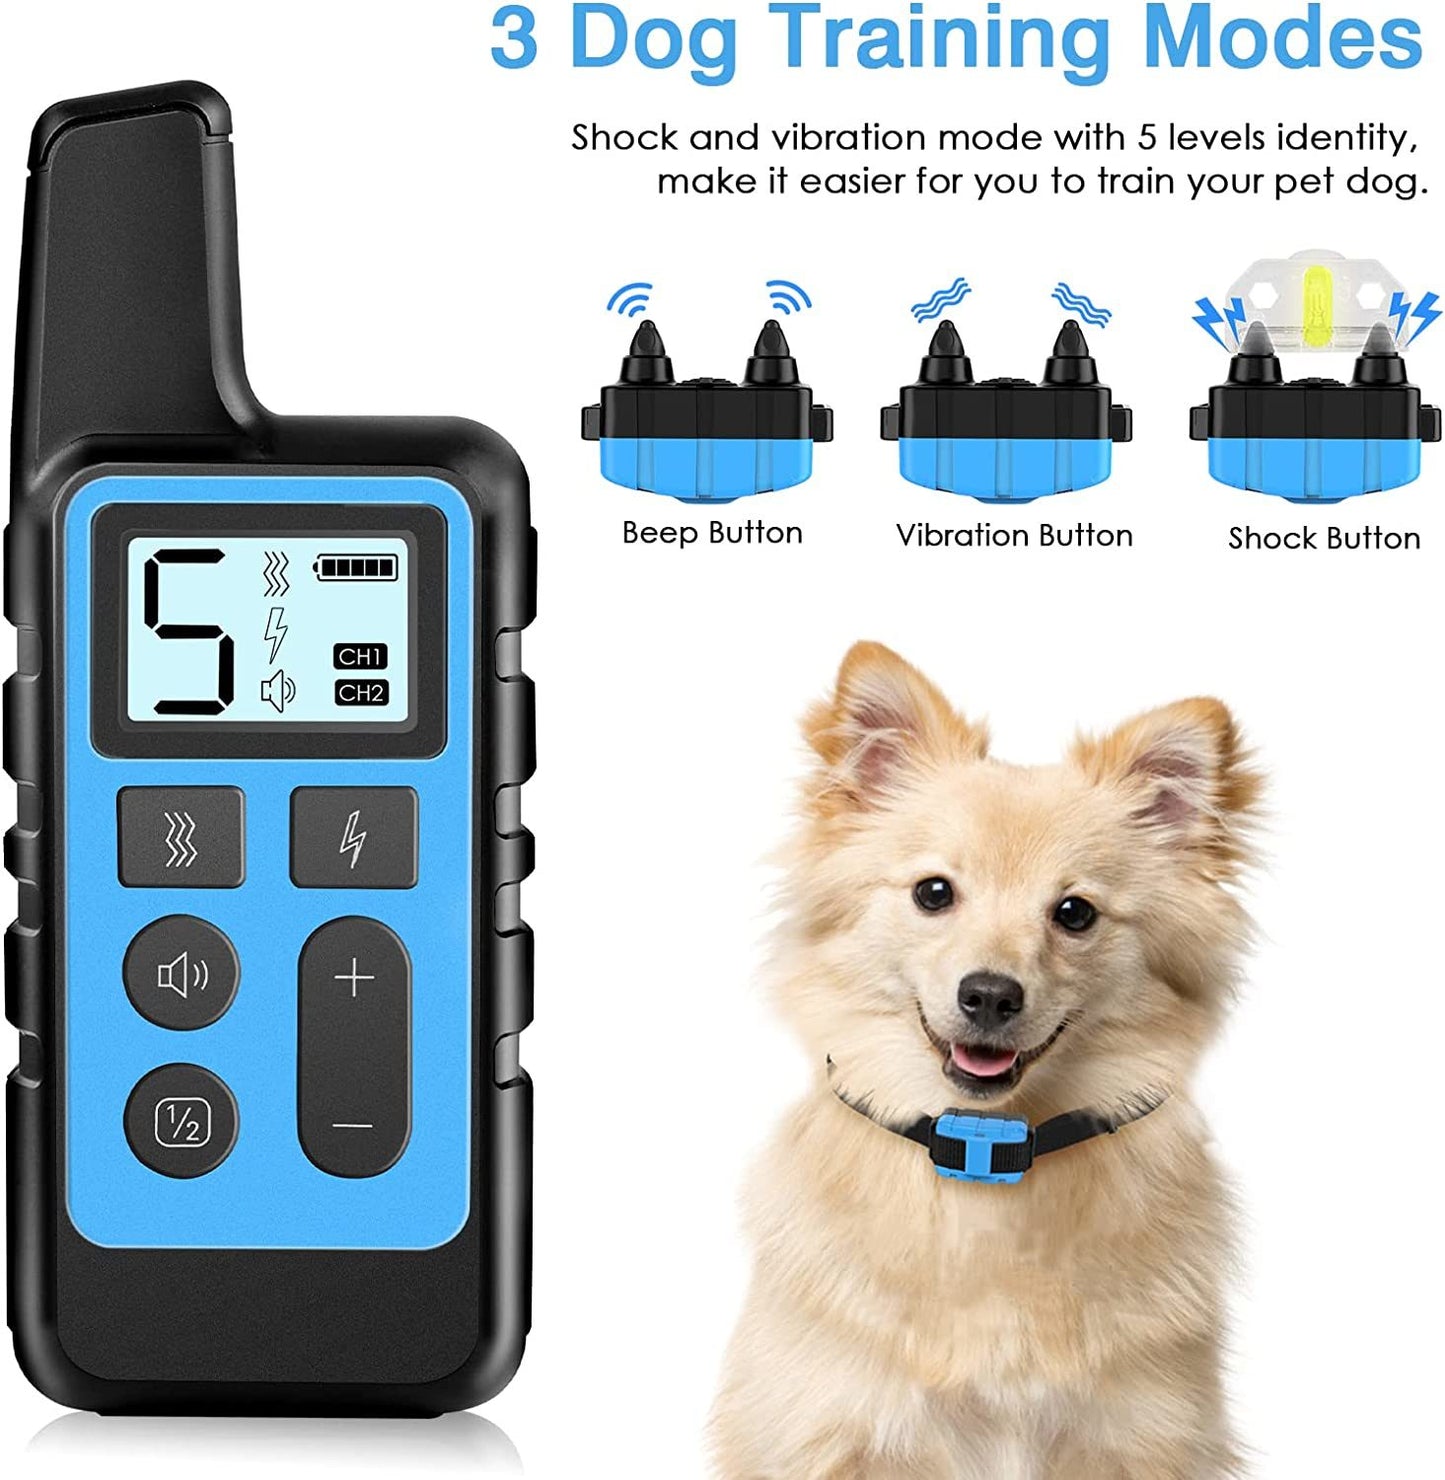 Heavy duty, electric Dog Training Collar Rechargeable Receiver Beep Shock for small Medium Large Dogs, dog leash. Raee Industries